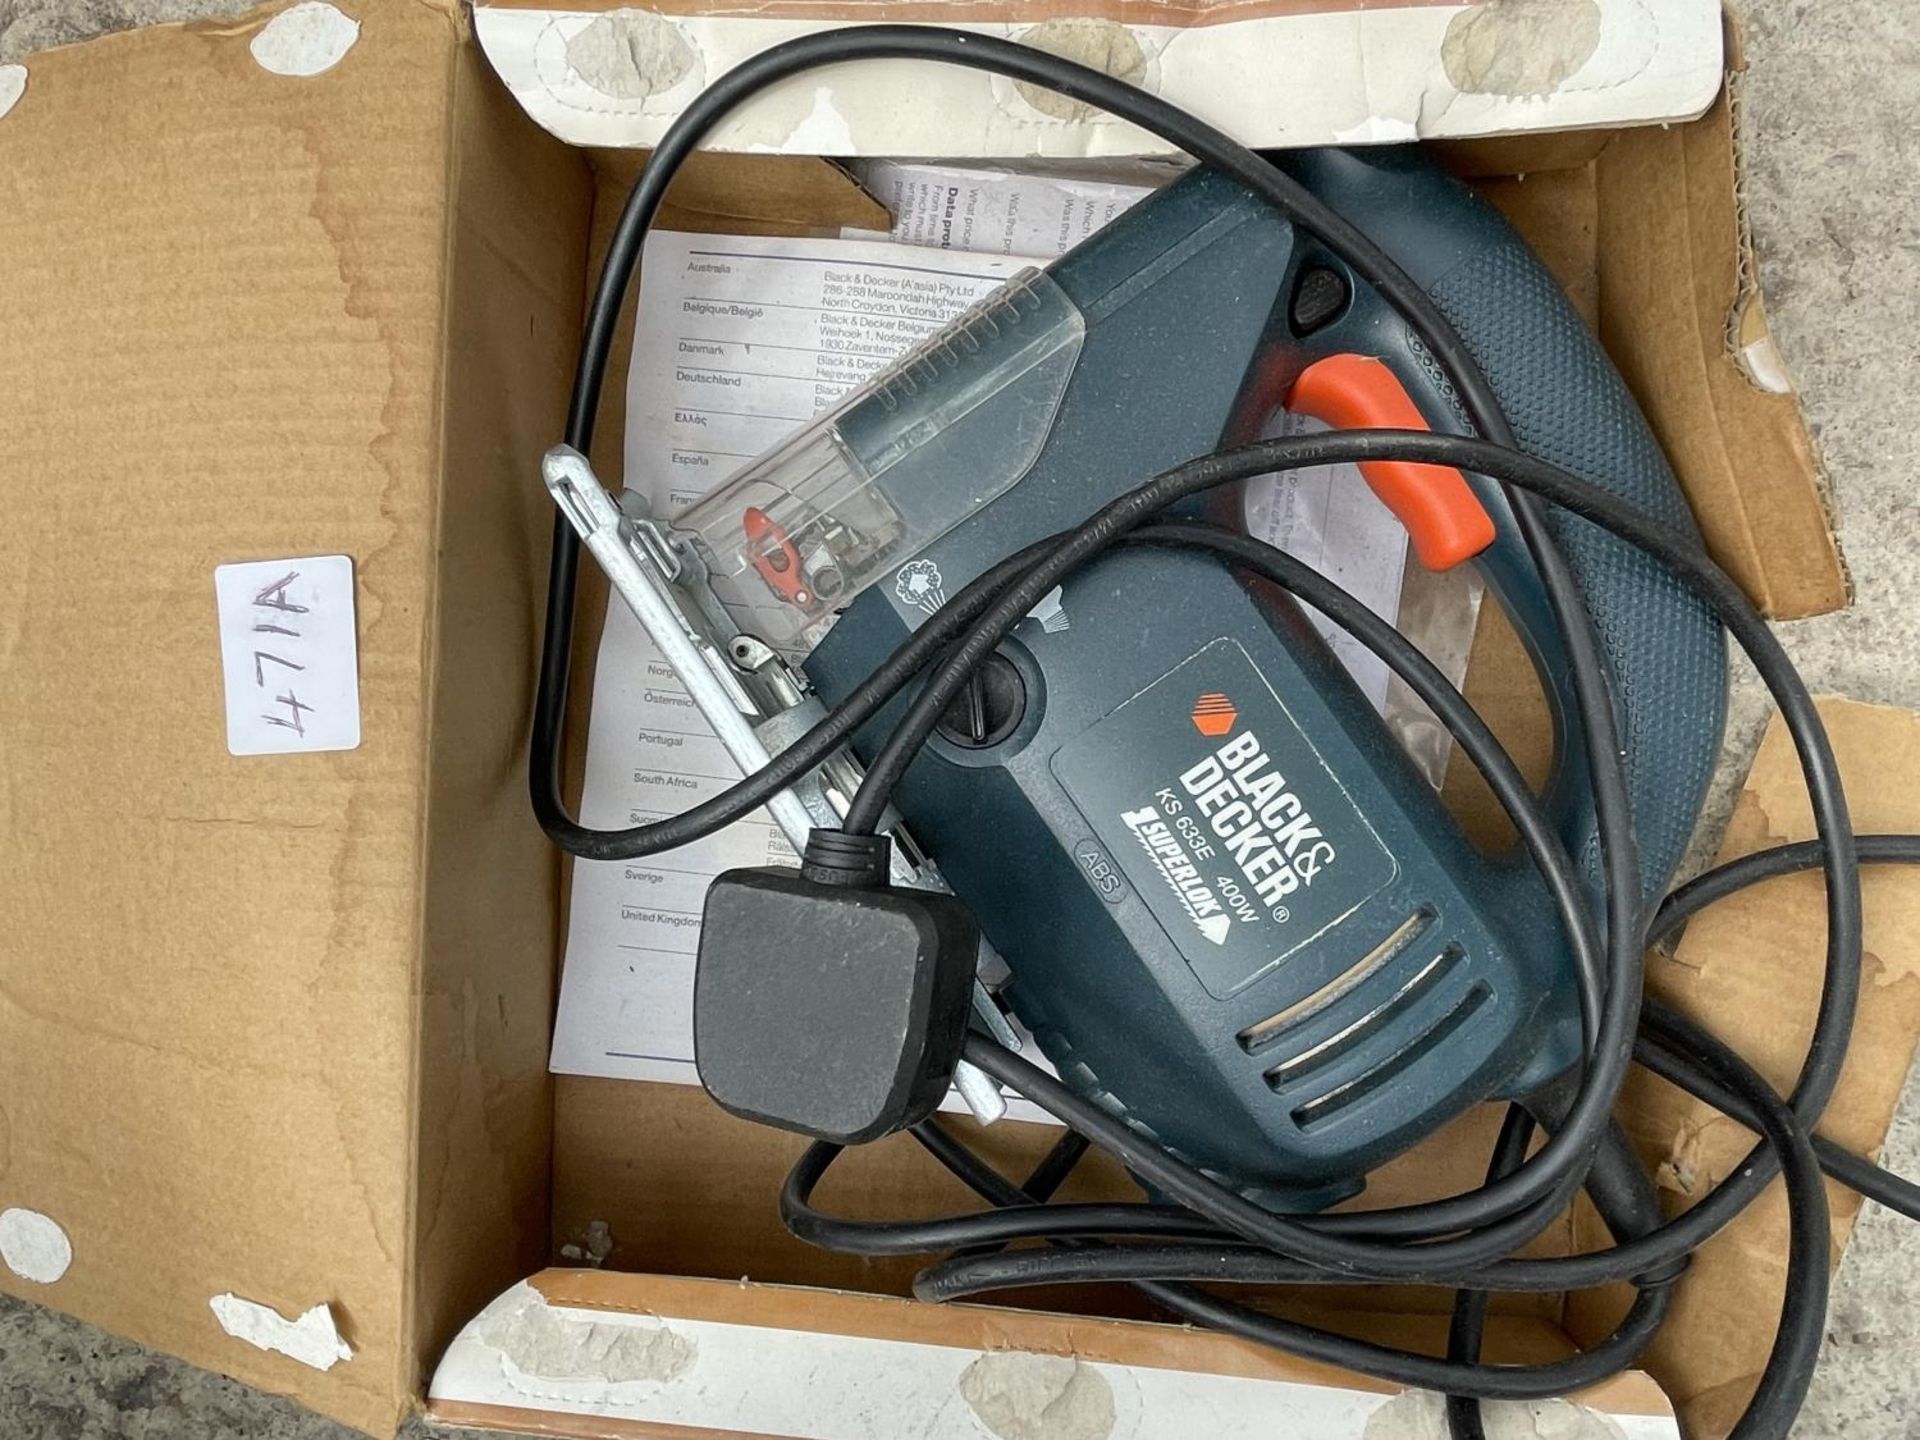 A JIGSAW AND A DRAPER SOLDERING GUN IN BOXES - Image 2 of 5